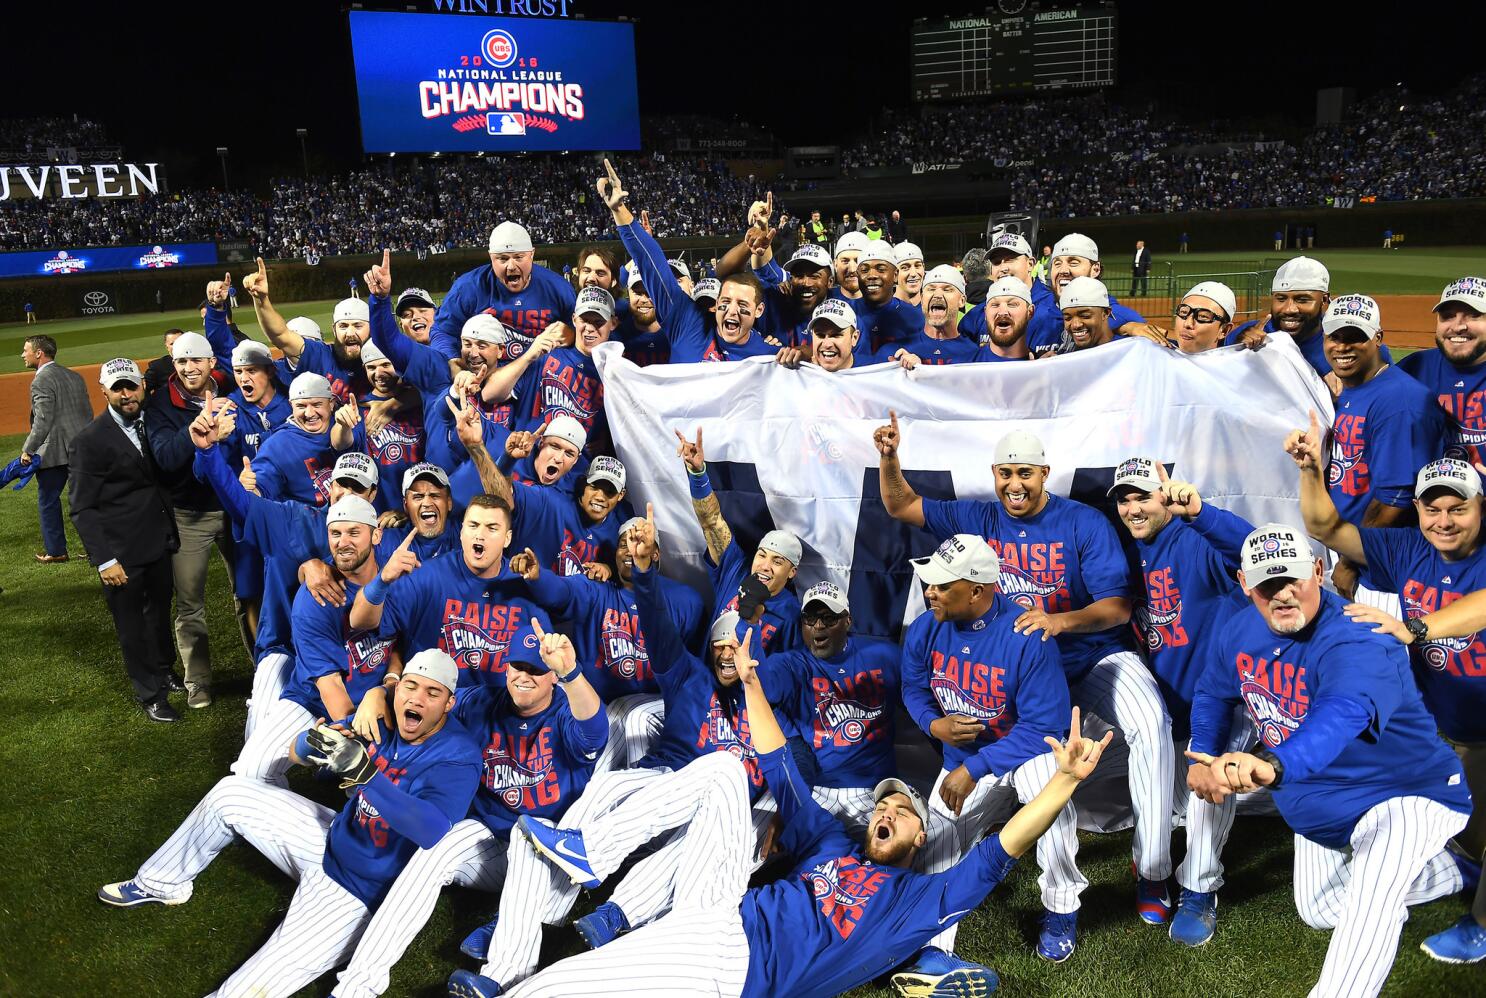 World Series first look: Cleveland vs. Chicago Cubs - Los Angeles Times